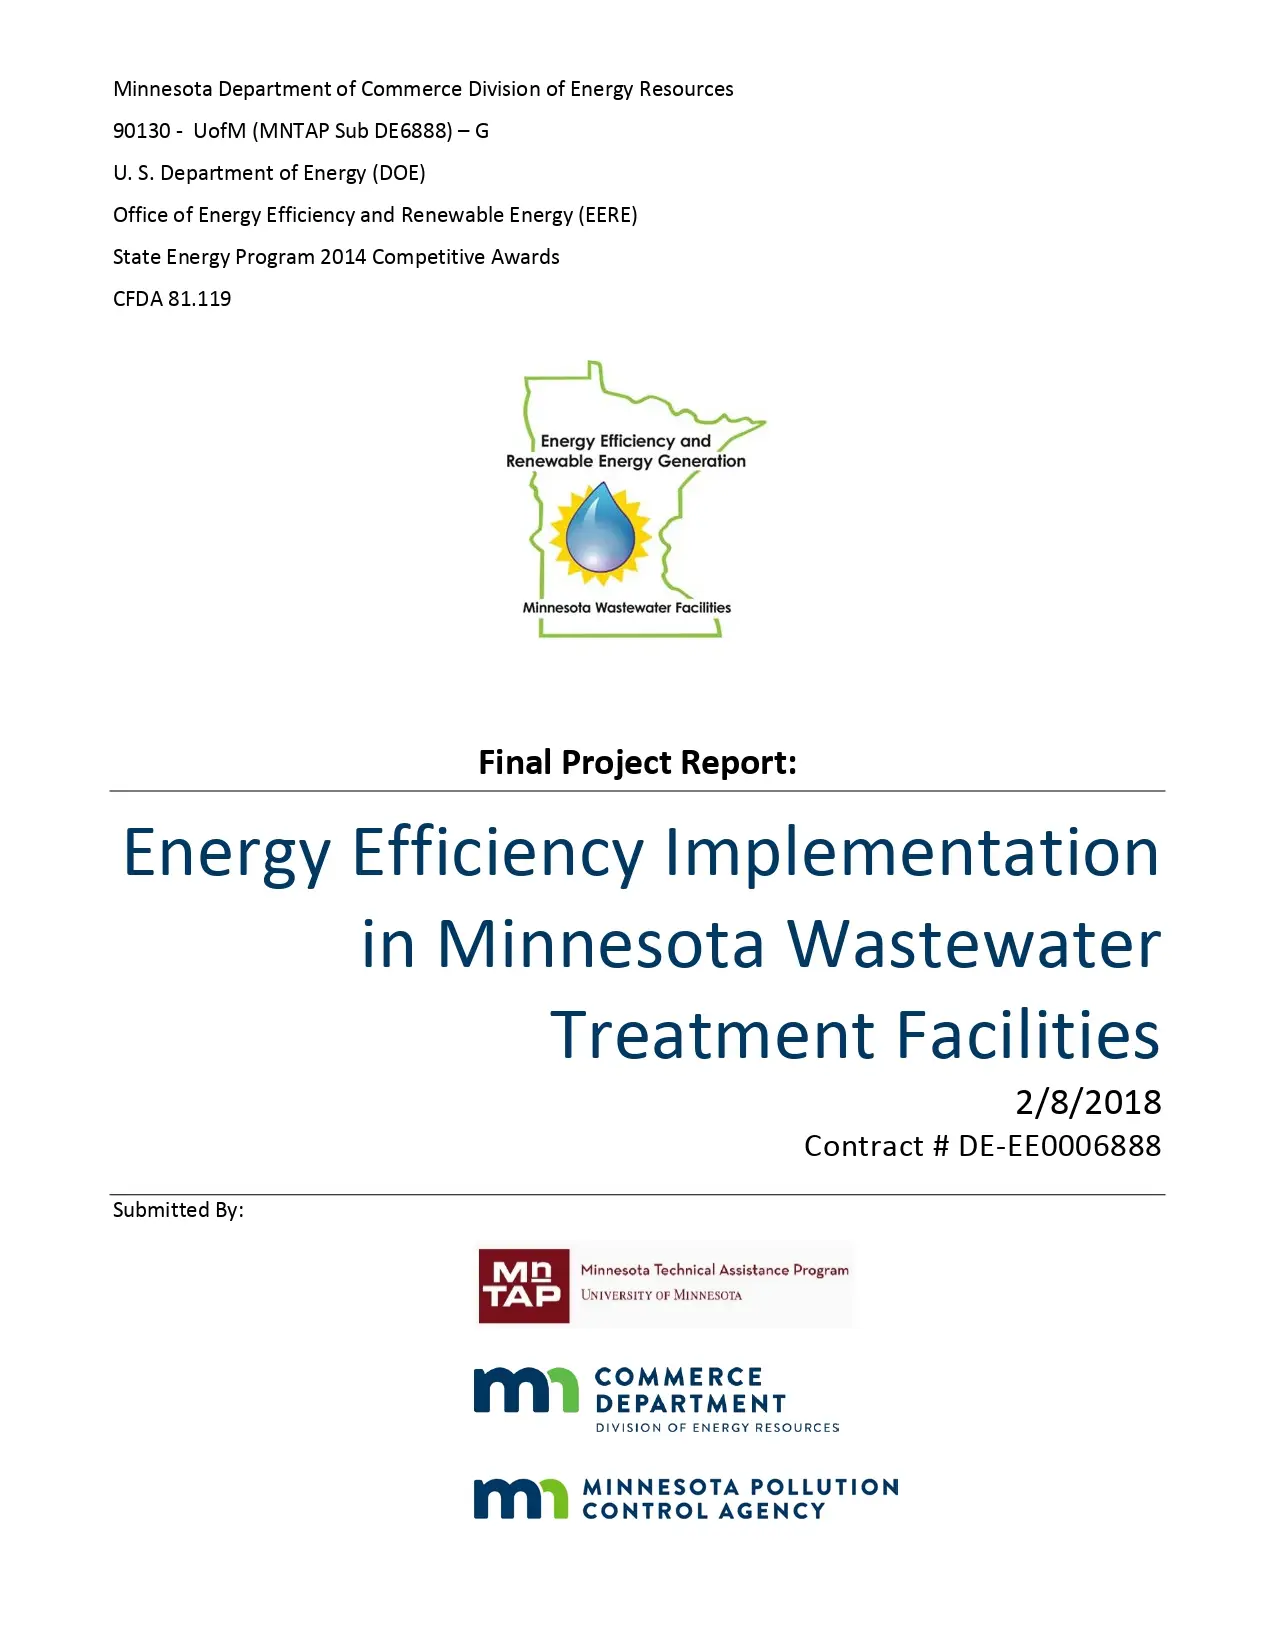 Energy Efficiency Implementation in Minnesota Wastewater Treatment Facilities